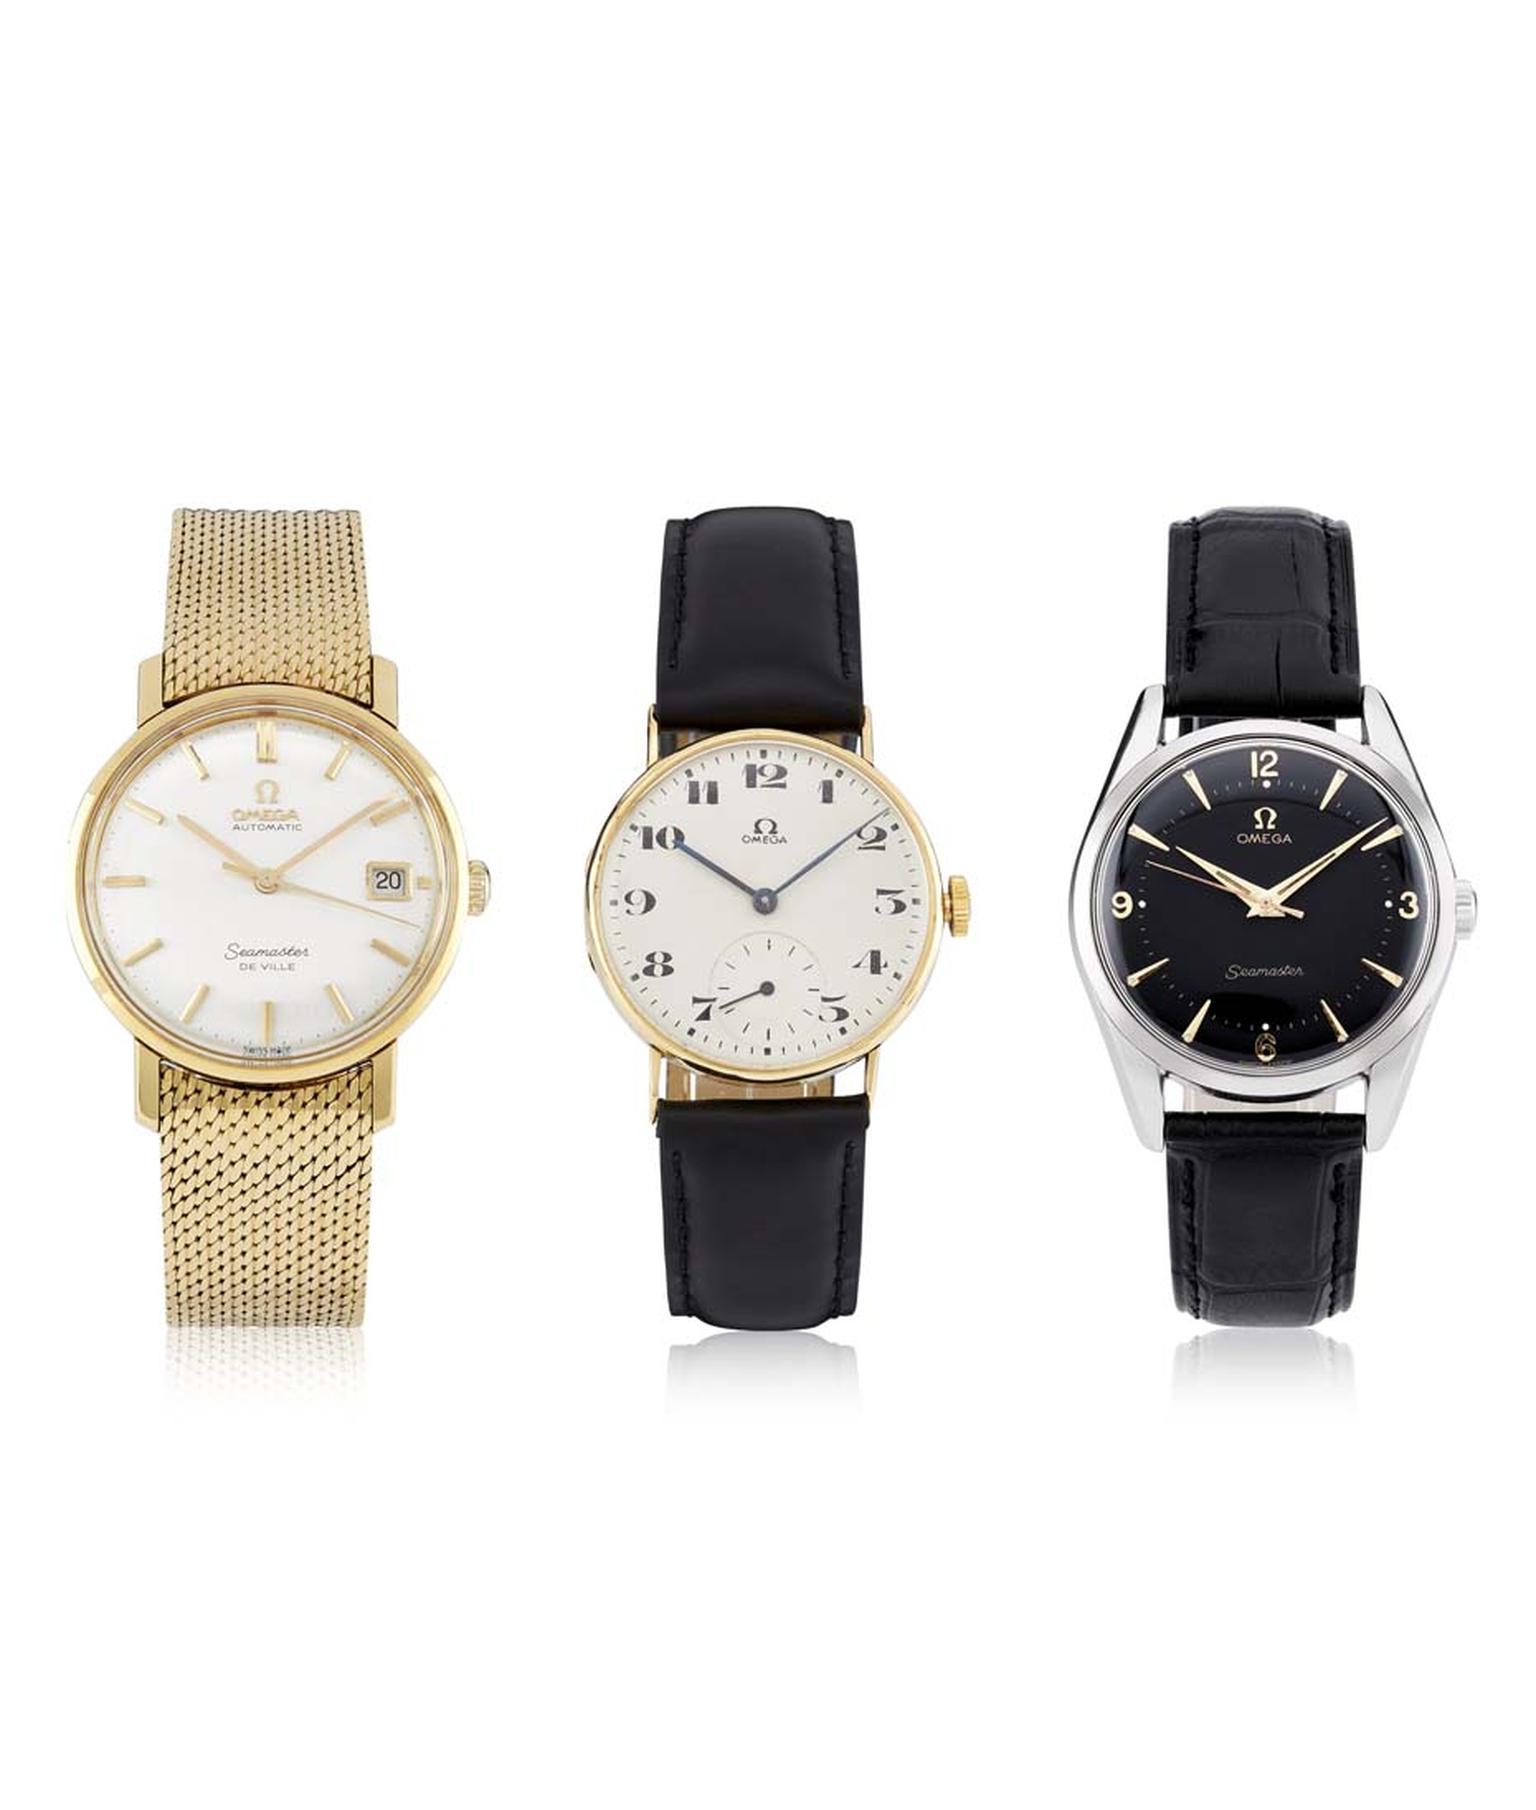 The Harrods Vintage Watch Collection also includes three Omega Seamaster timepieces, including a rare heritage hand-wound model dating from 1939, centre